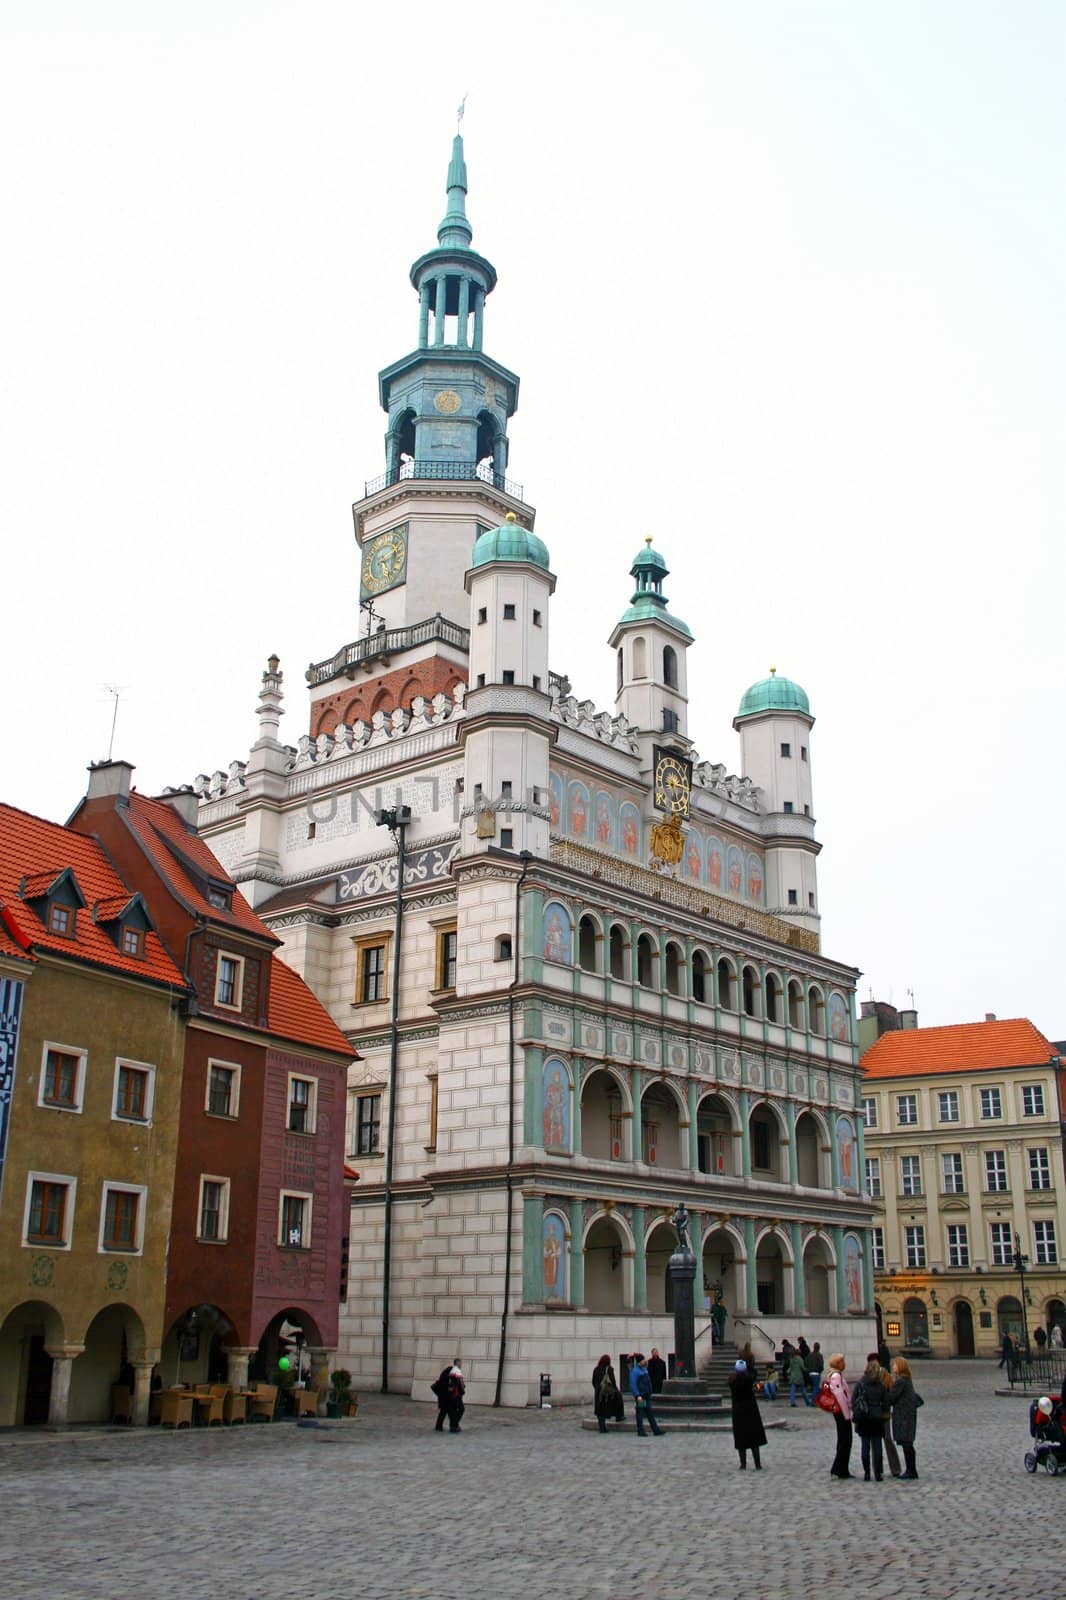 Guild hall at old town in Poznan, Poland